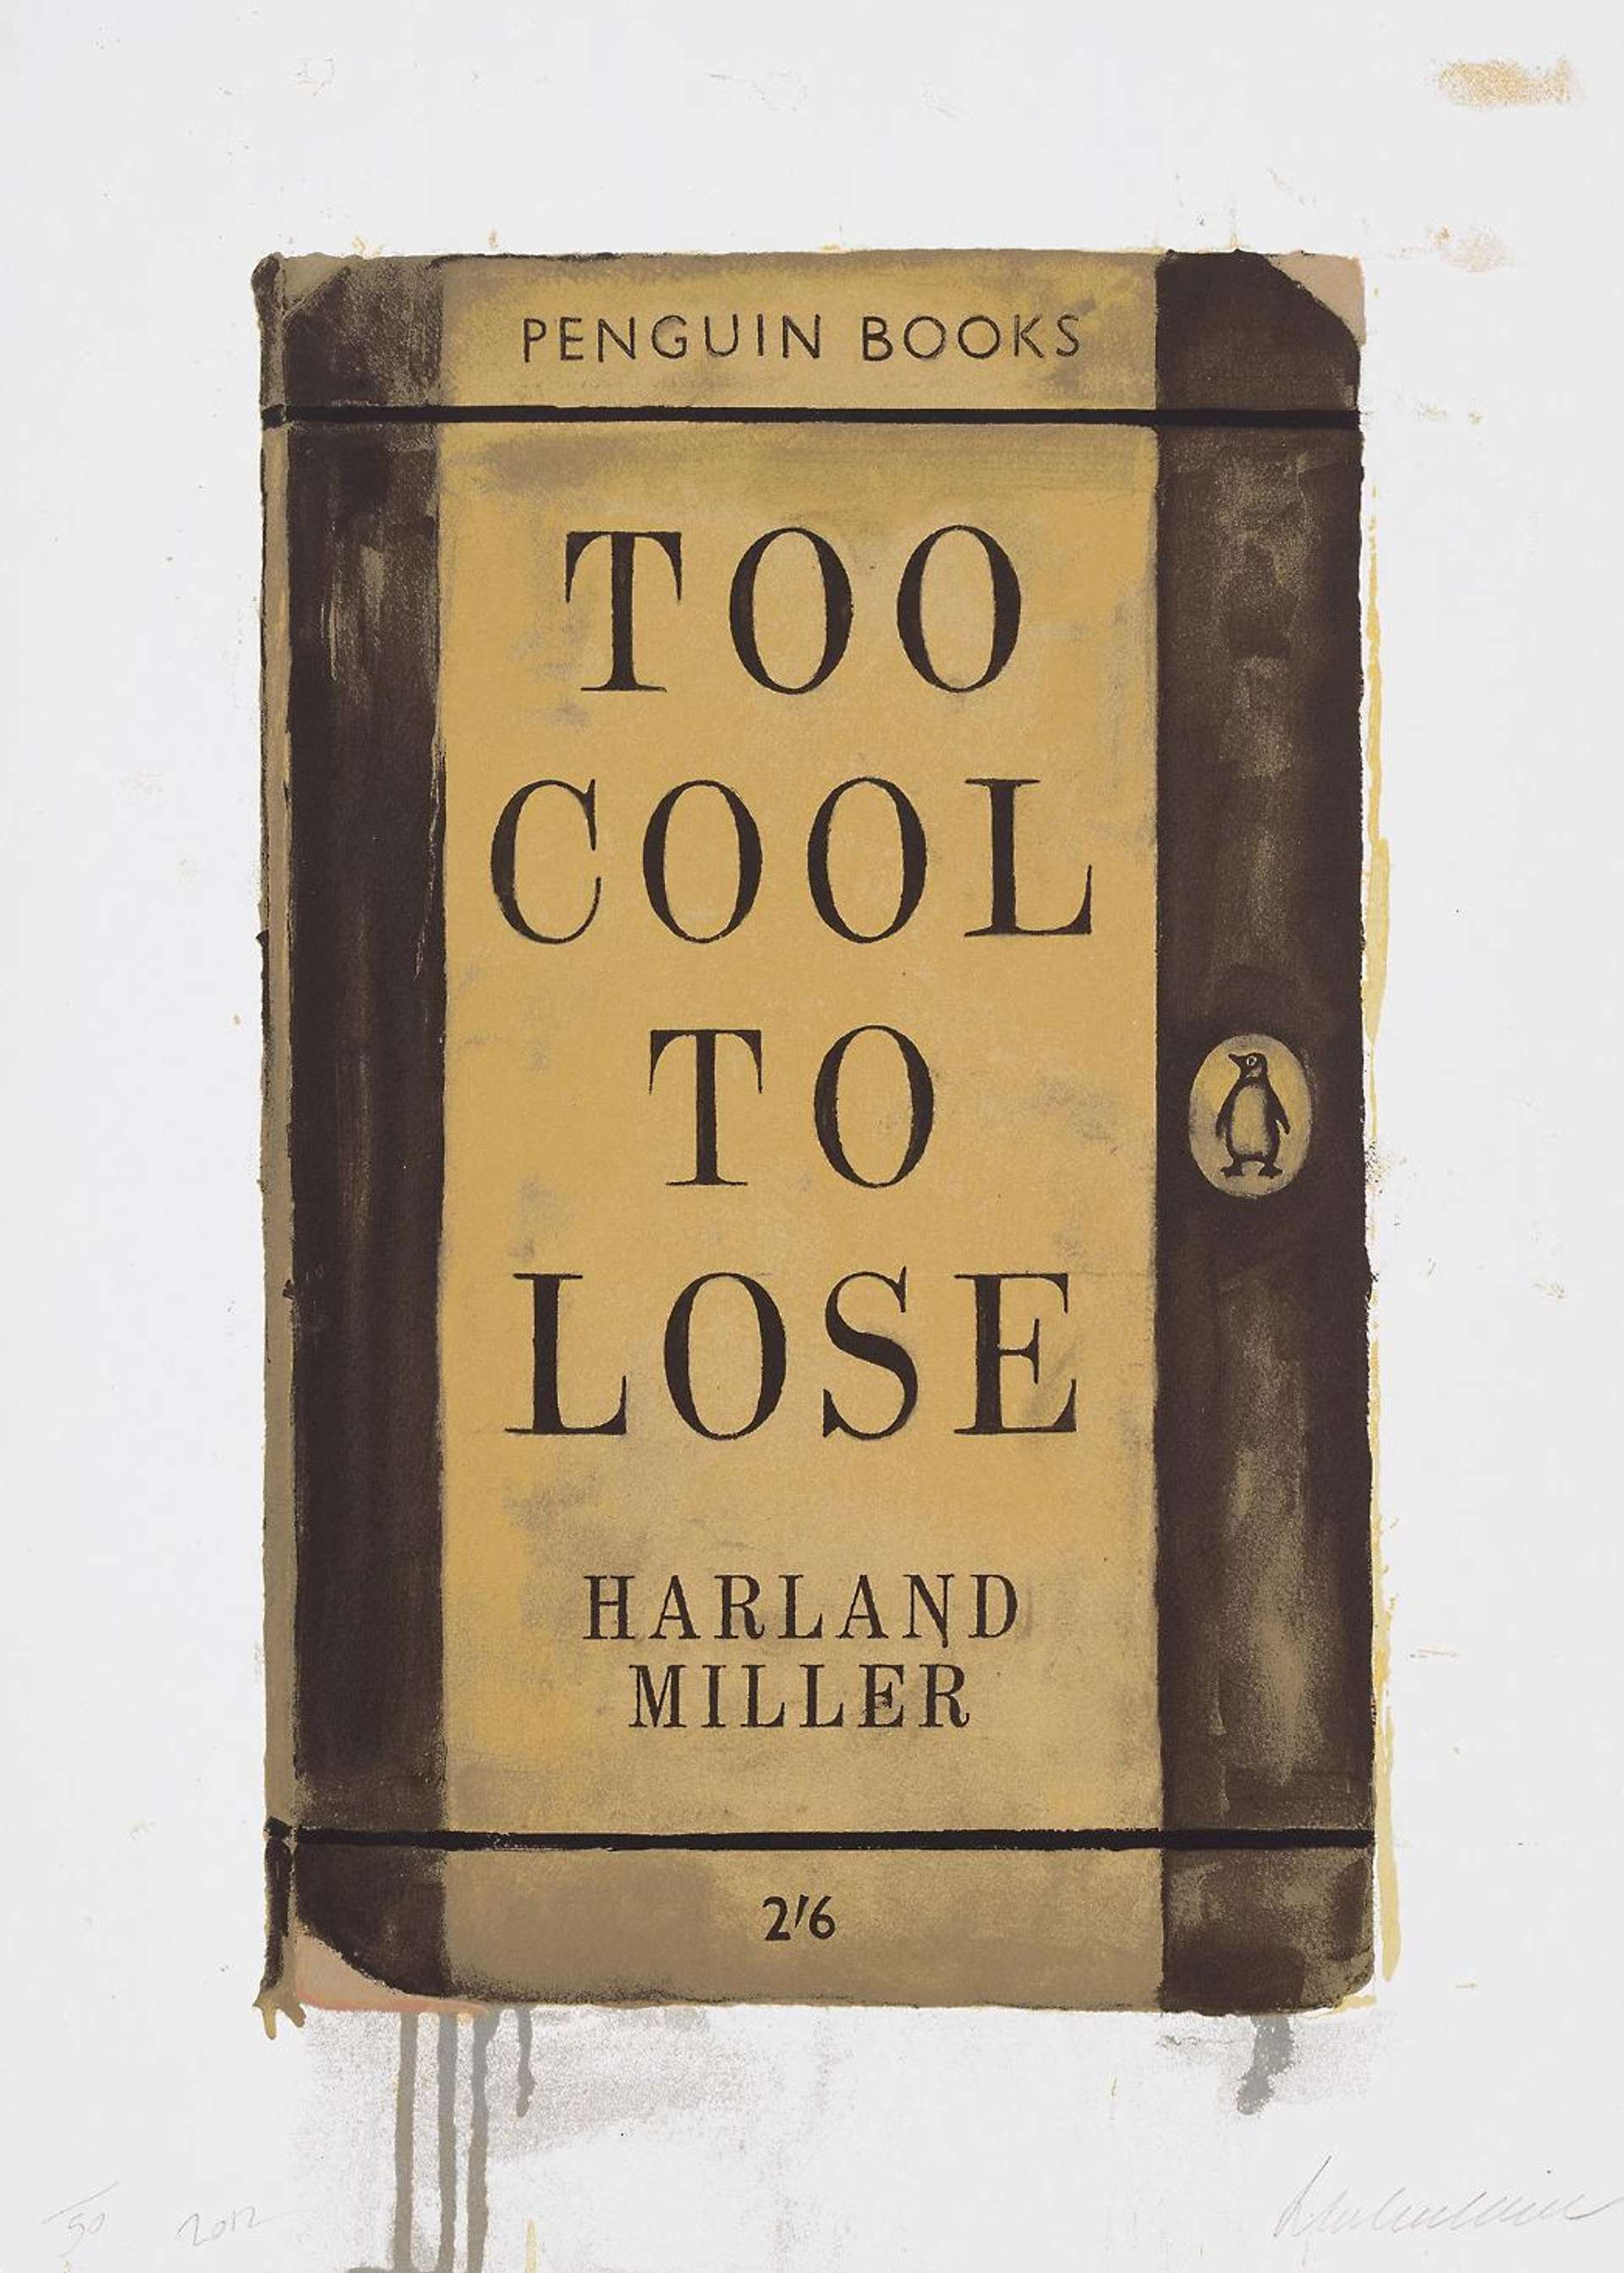 Too Cool To Lose - Signed Print by Harland Miller 2012 - MyArtBroker